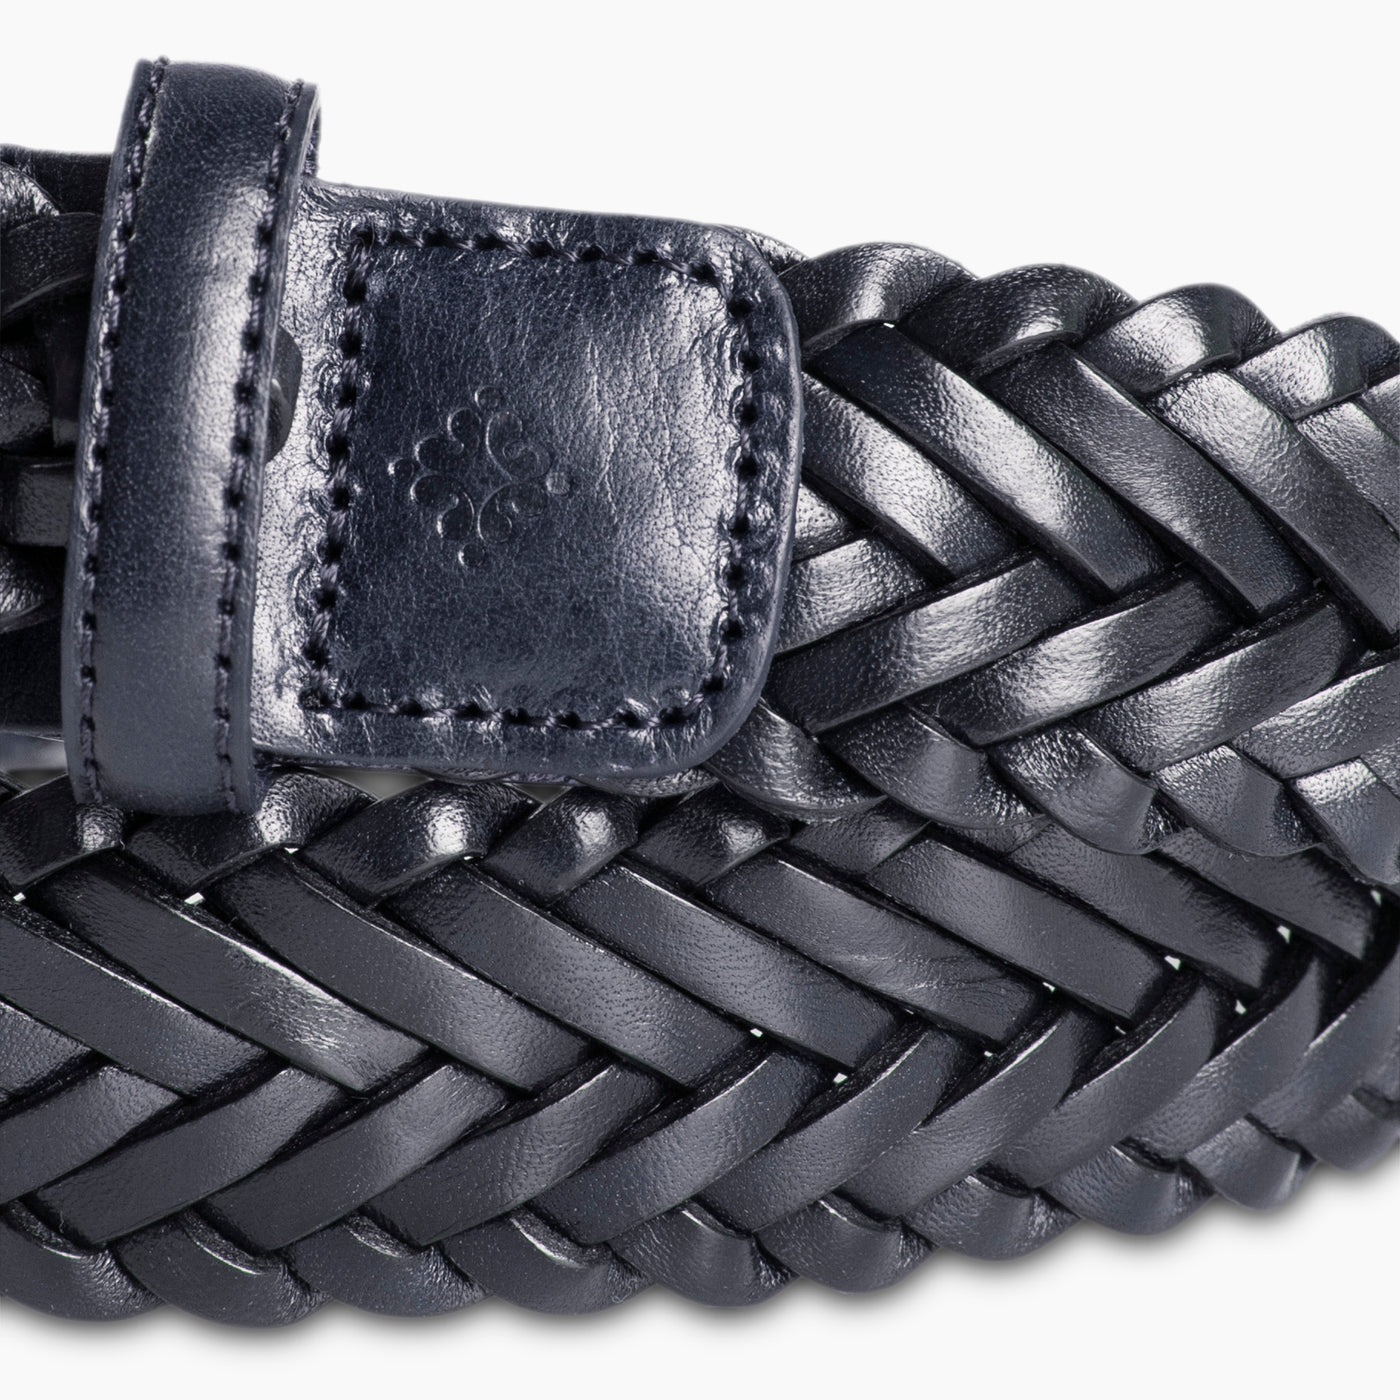 Berry hand woven leather belt